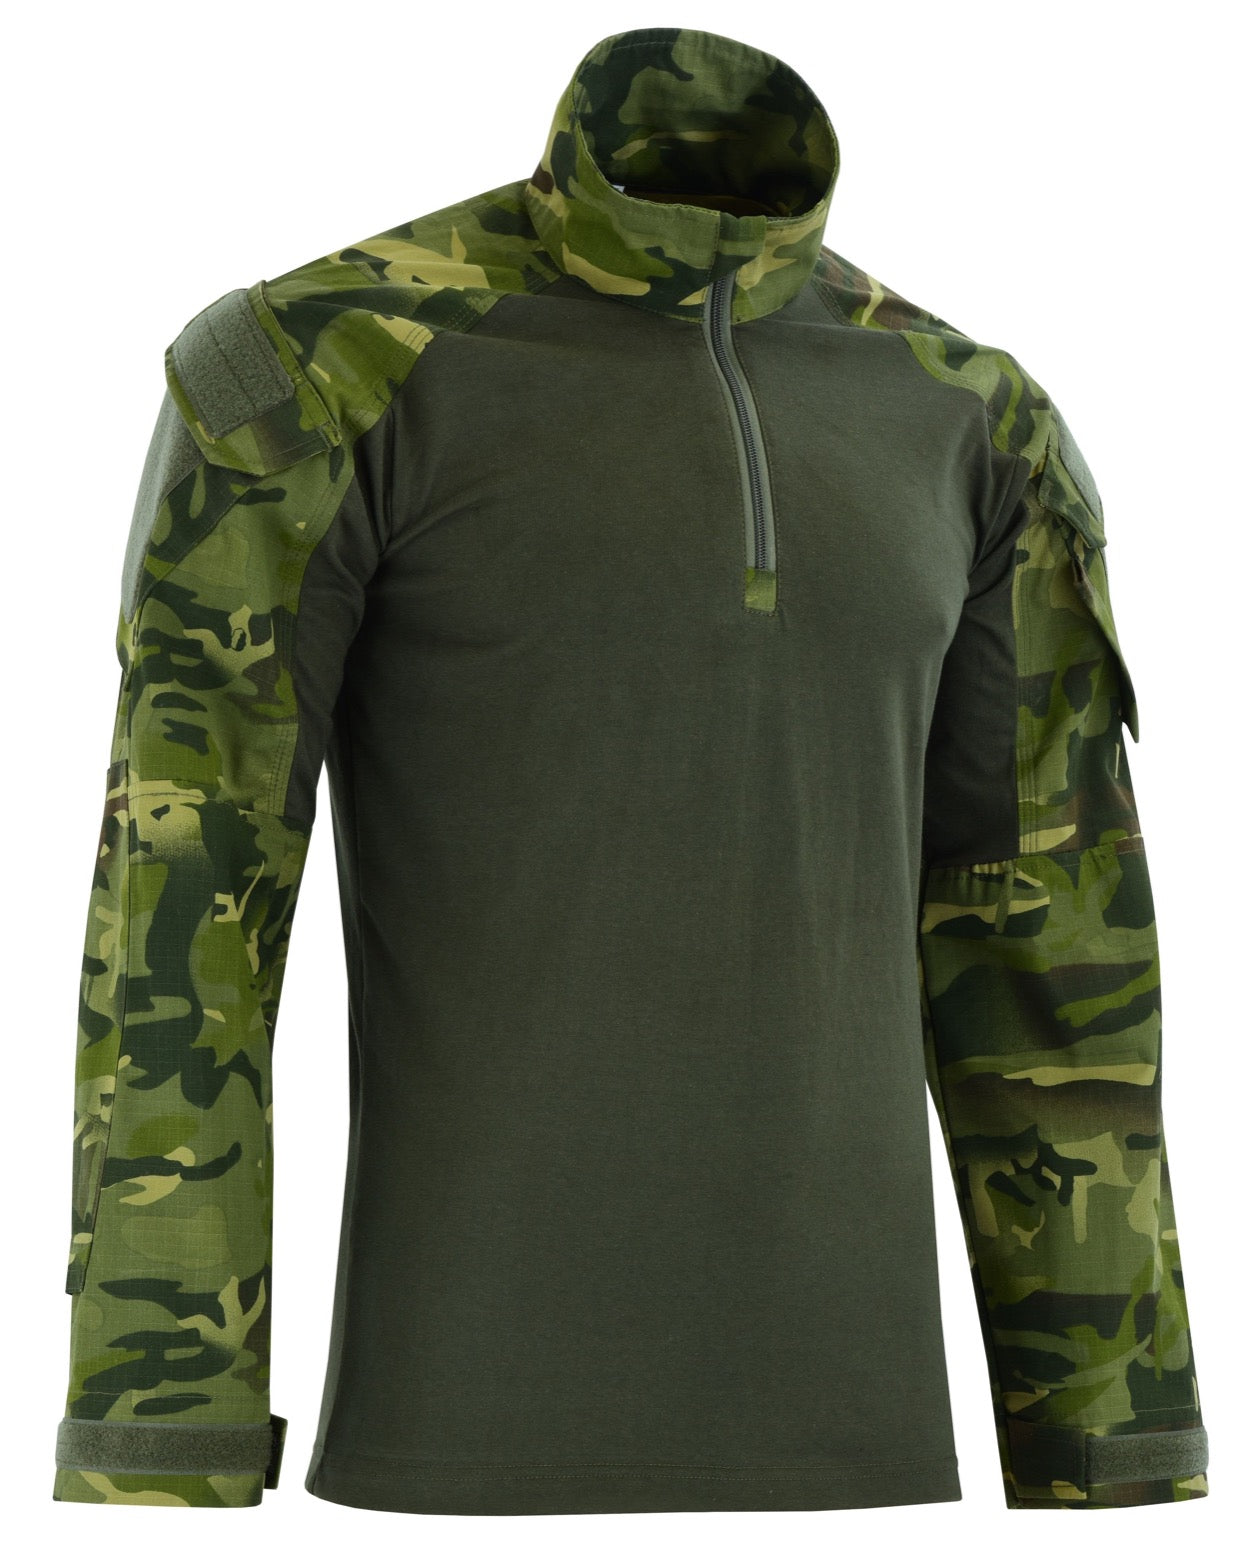 Tactical Zone  HYBRID TACTICAL  COMBAT SHIRT SIZE 3XL+ UTP TEMPERATE